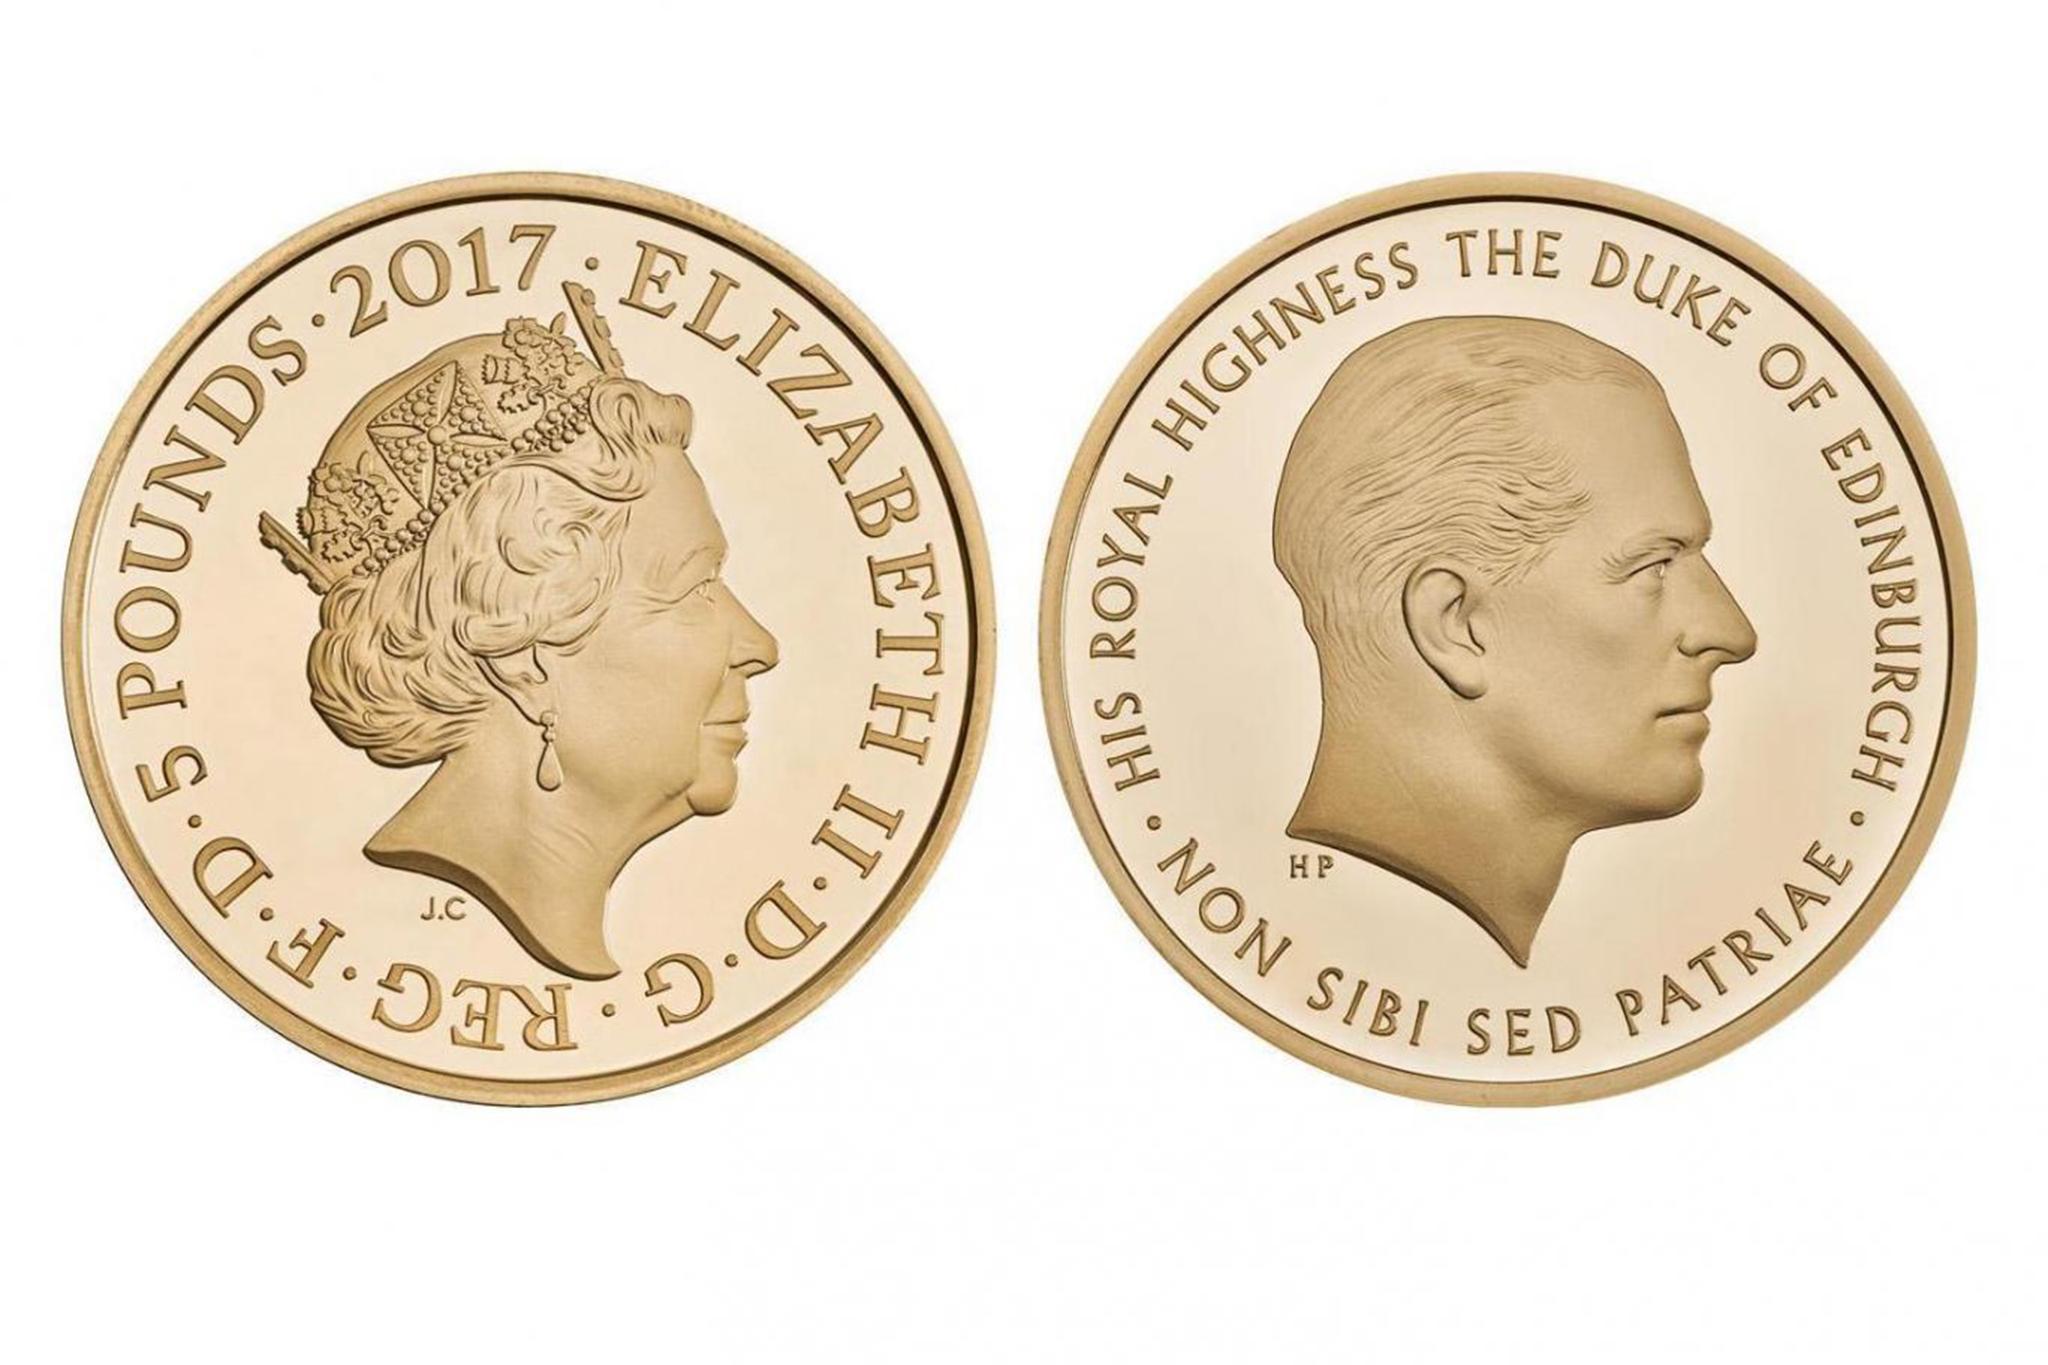 Prince Philip's retirement from royal duties marked by £5 coin | The ...